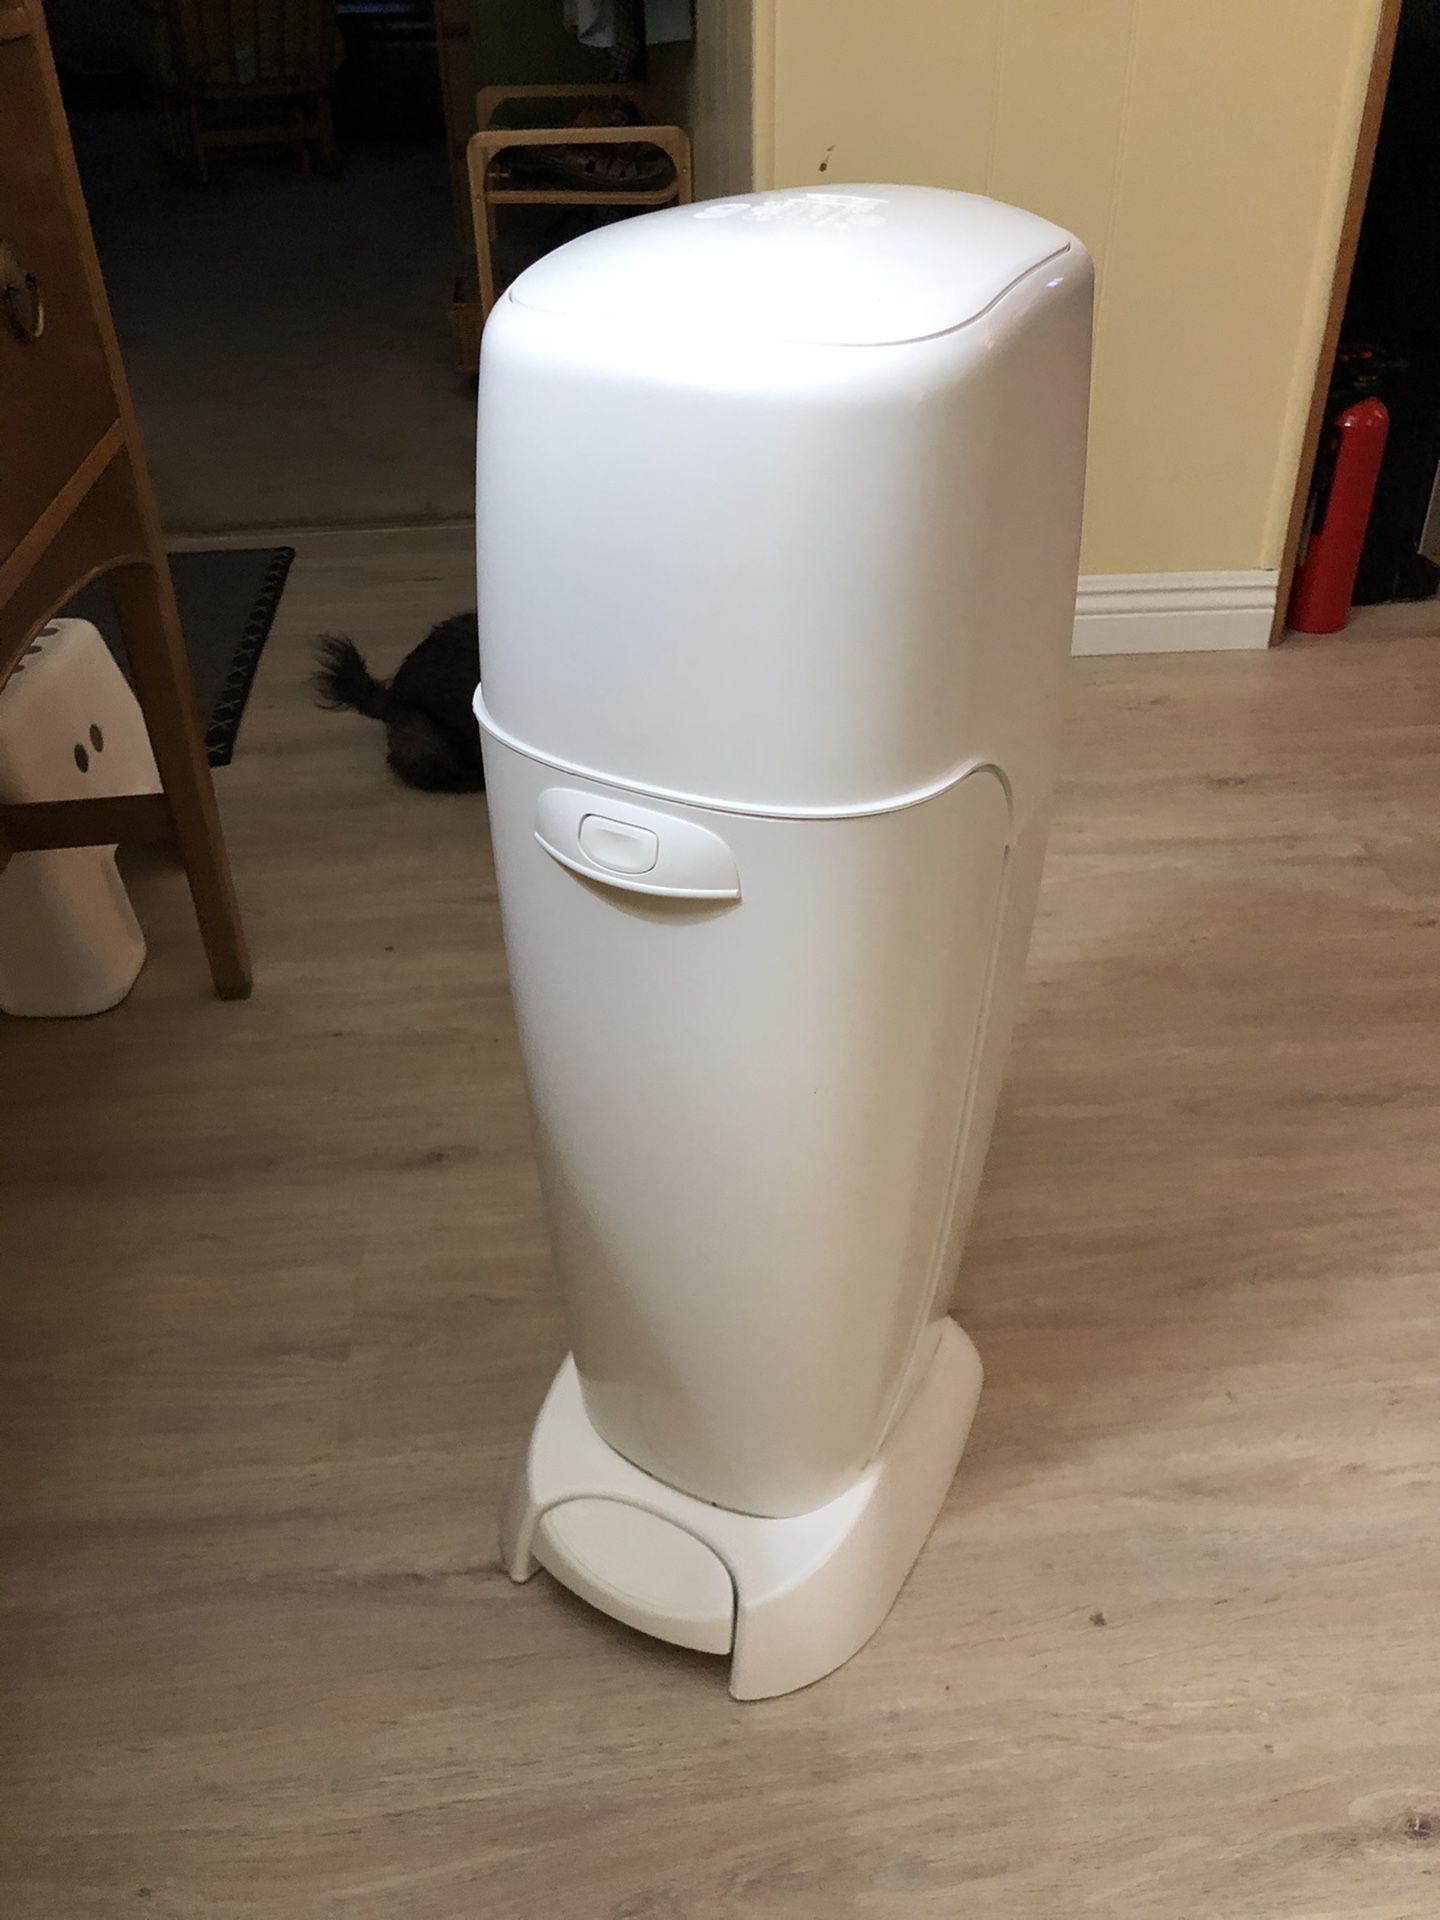 Diaper Genie, clean & like new! Kept at grandma’s house for when grand baby visited.